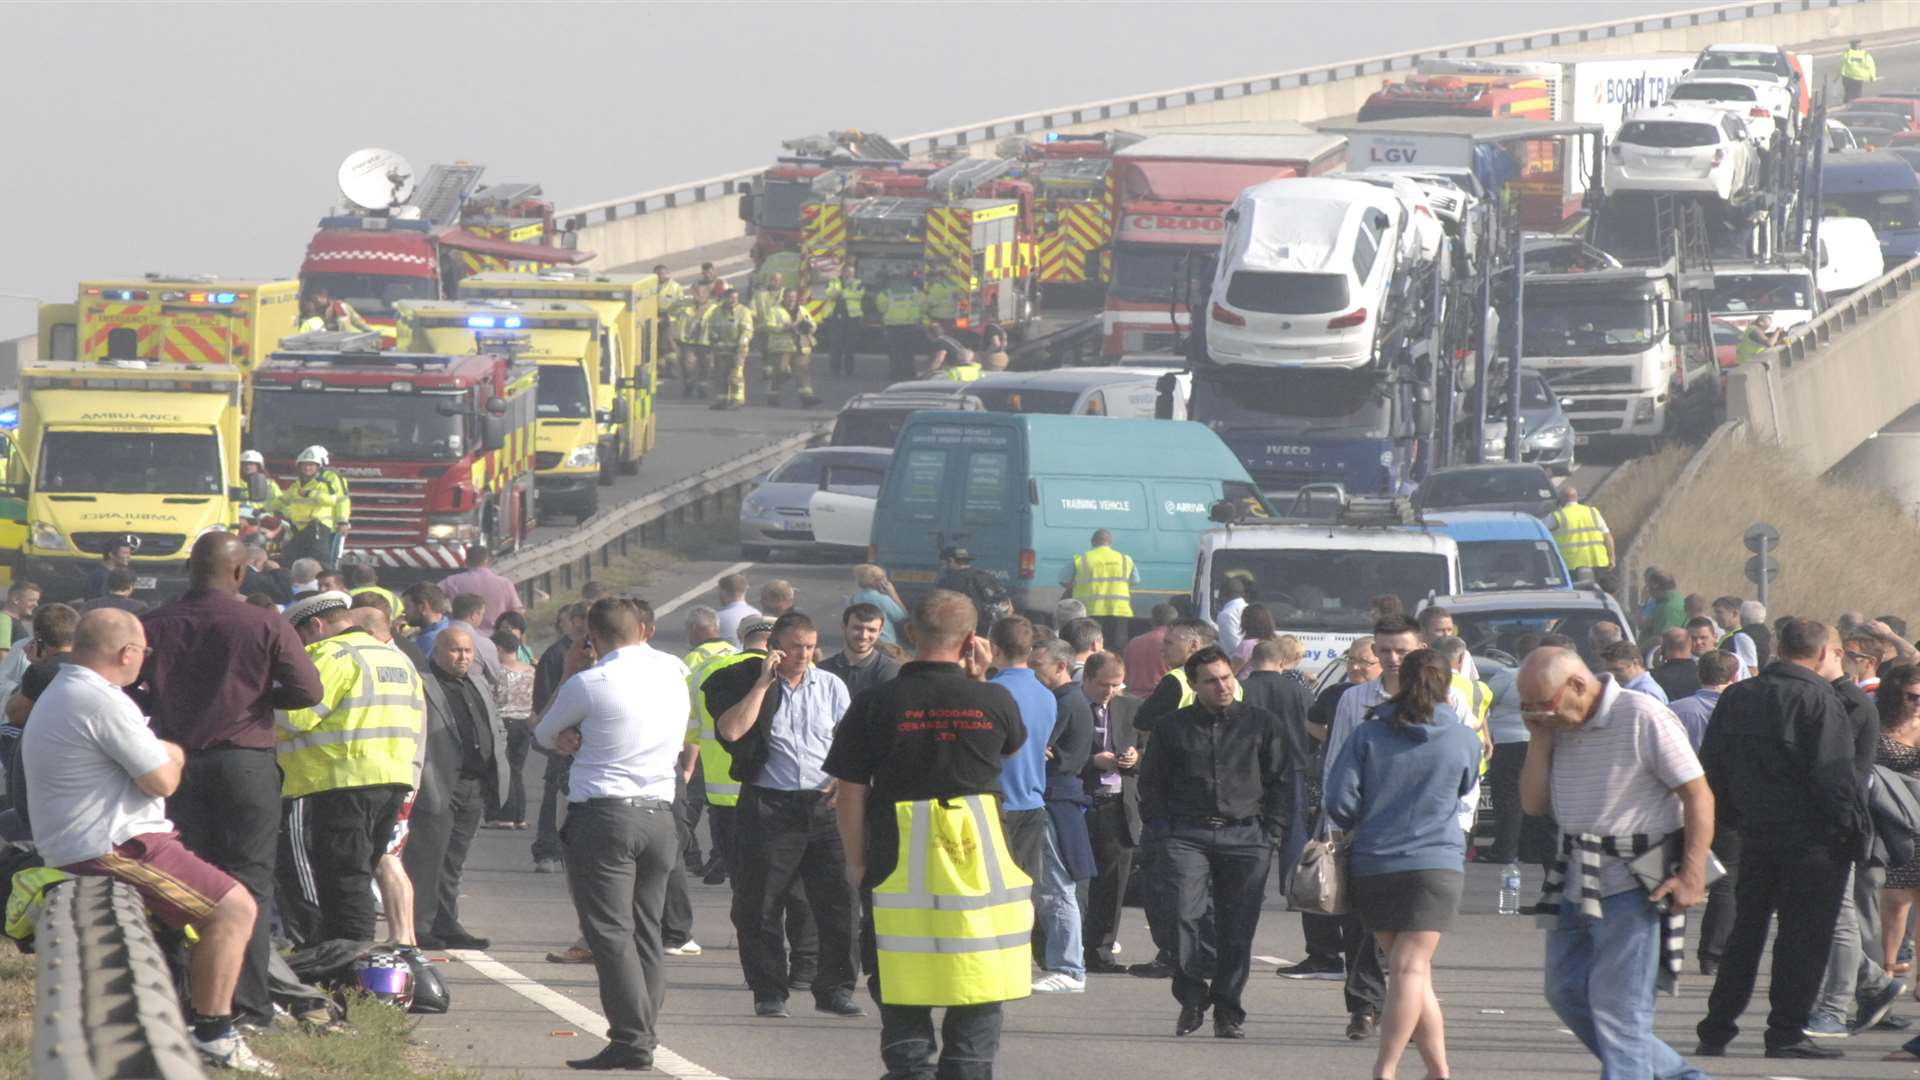 Emergency vehicles flank the scene of the crash on the Sheppey Crossing